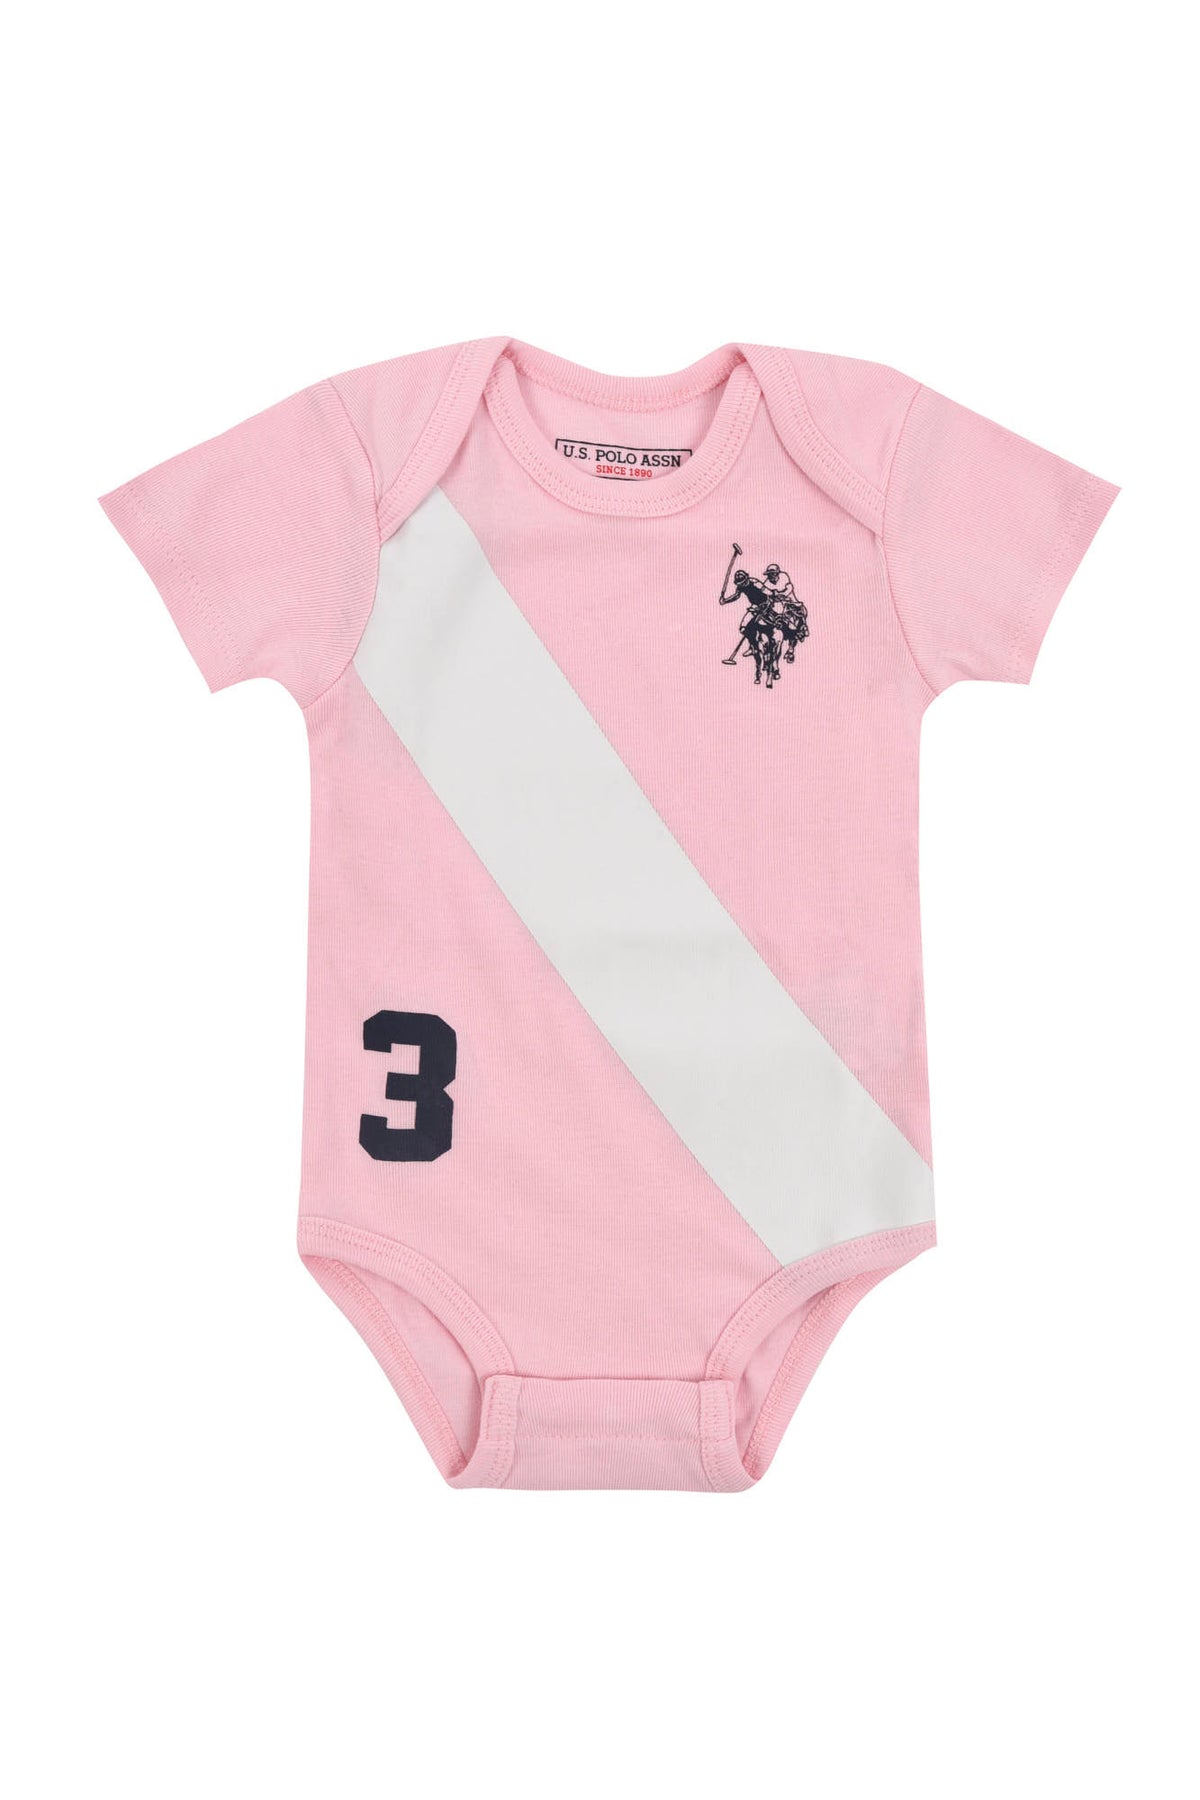 Baby 3 Piece Gifting Set in Light Pink